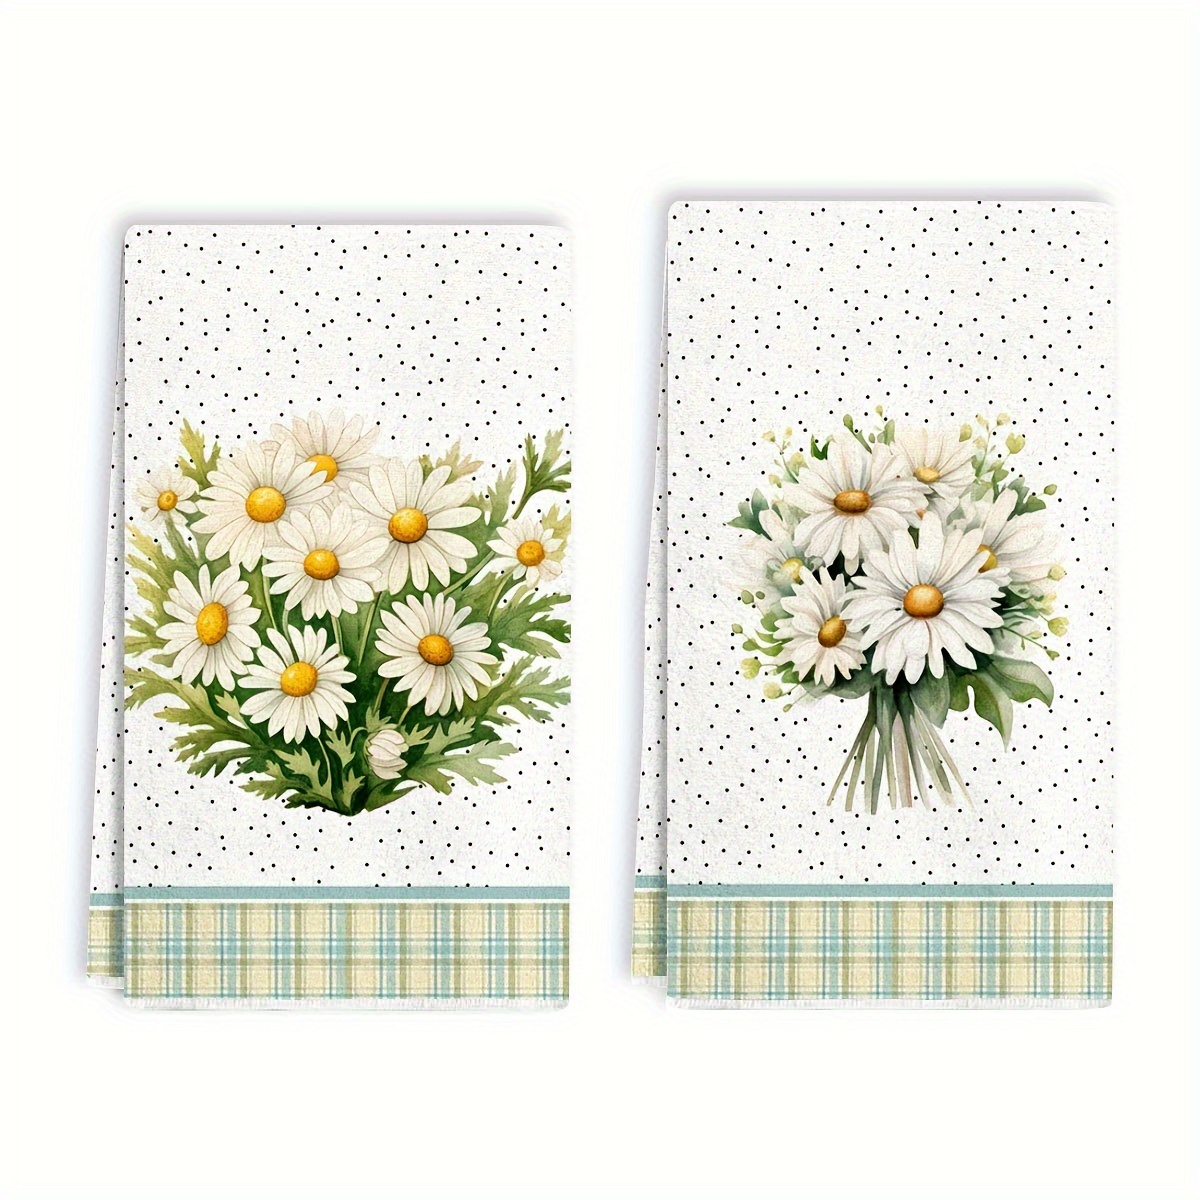 

2pcs Dish Cloths, Small Daisy Contemporary Style Hand Towels, Superfine Fiber Absorbent Kitchen Dish Cloths, Tea Towels, For Cooking, Baking, Housewarming Gifts, Cleaning Supplies, Bathroom Supplies